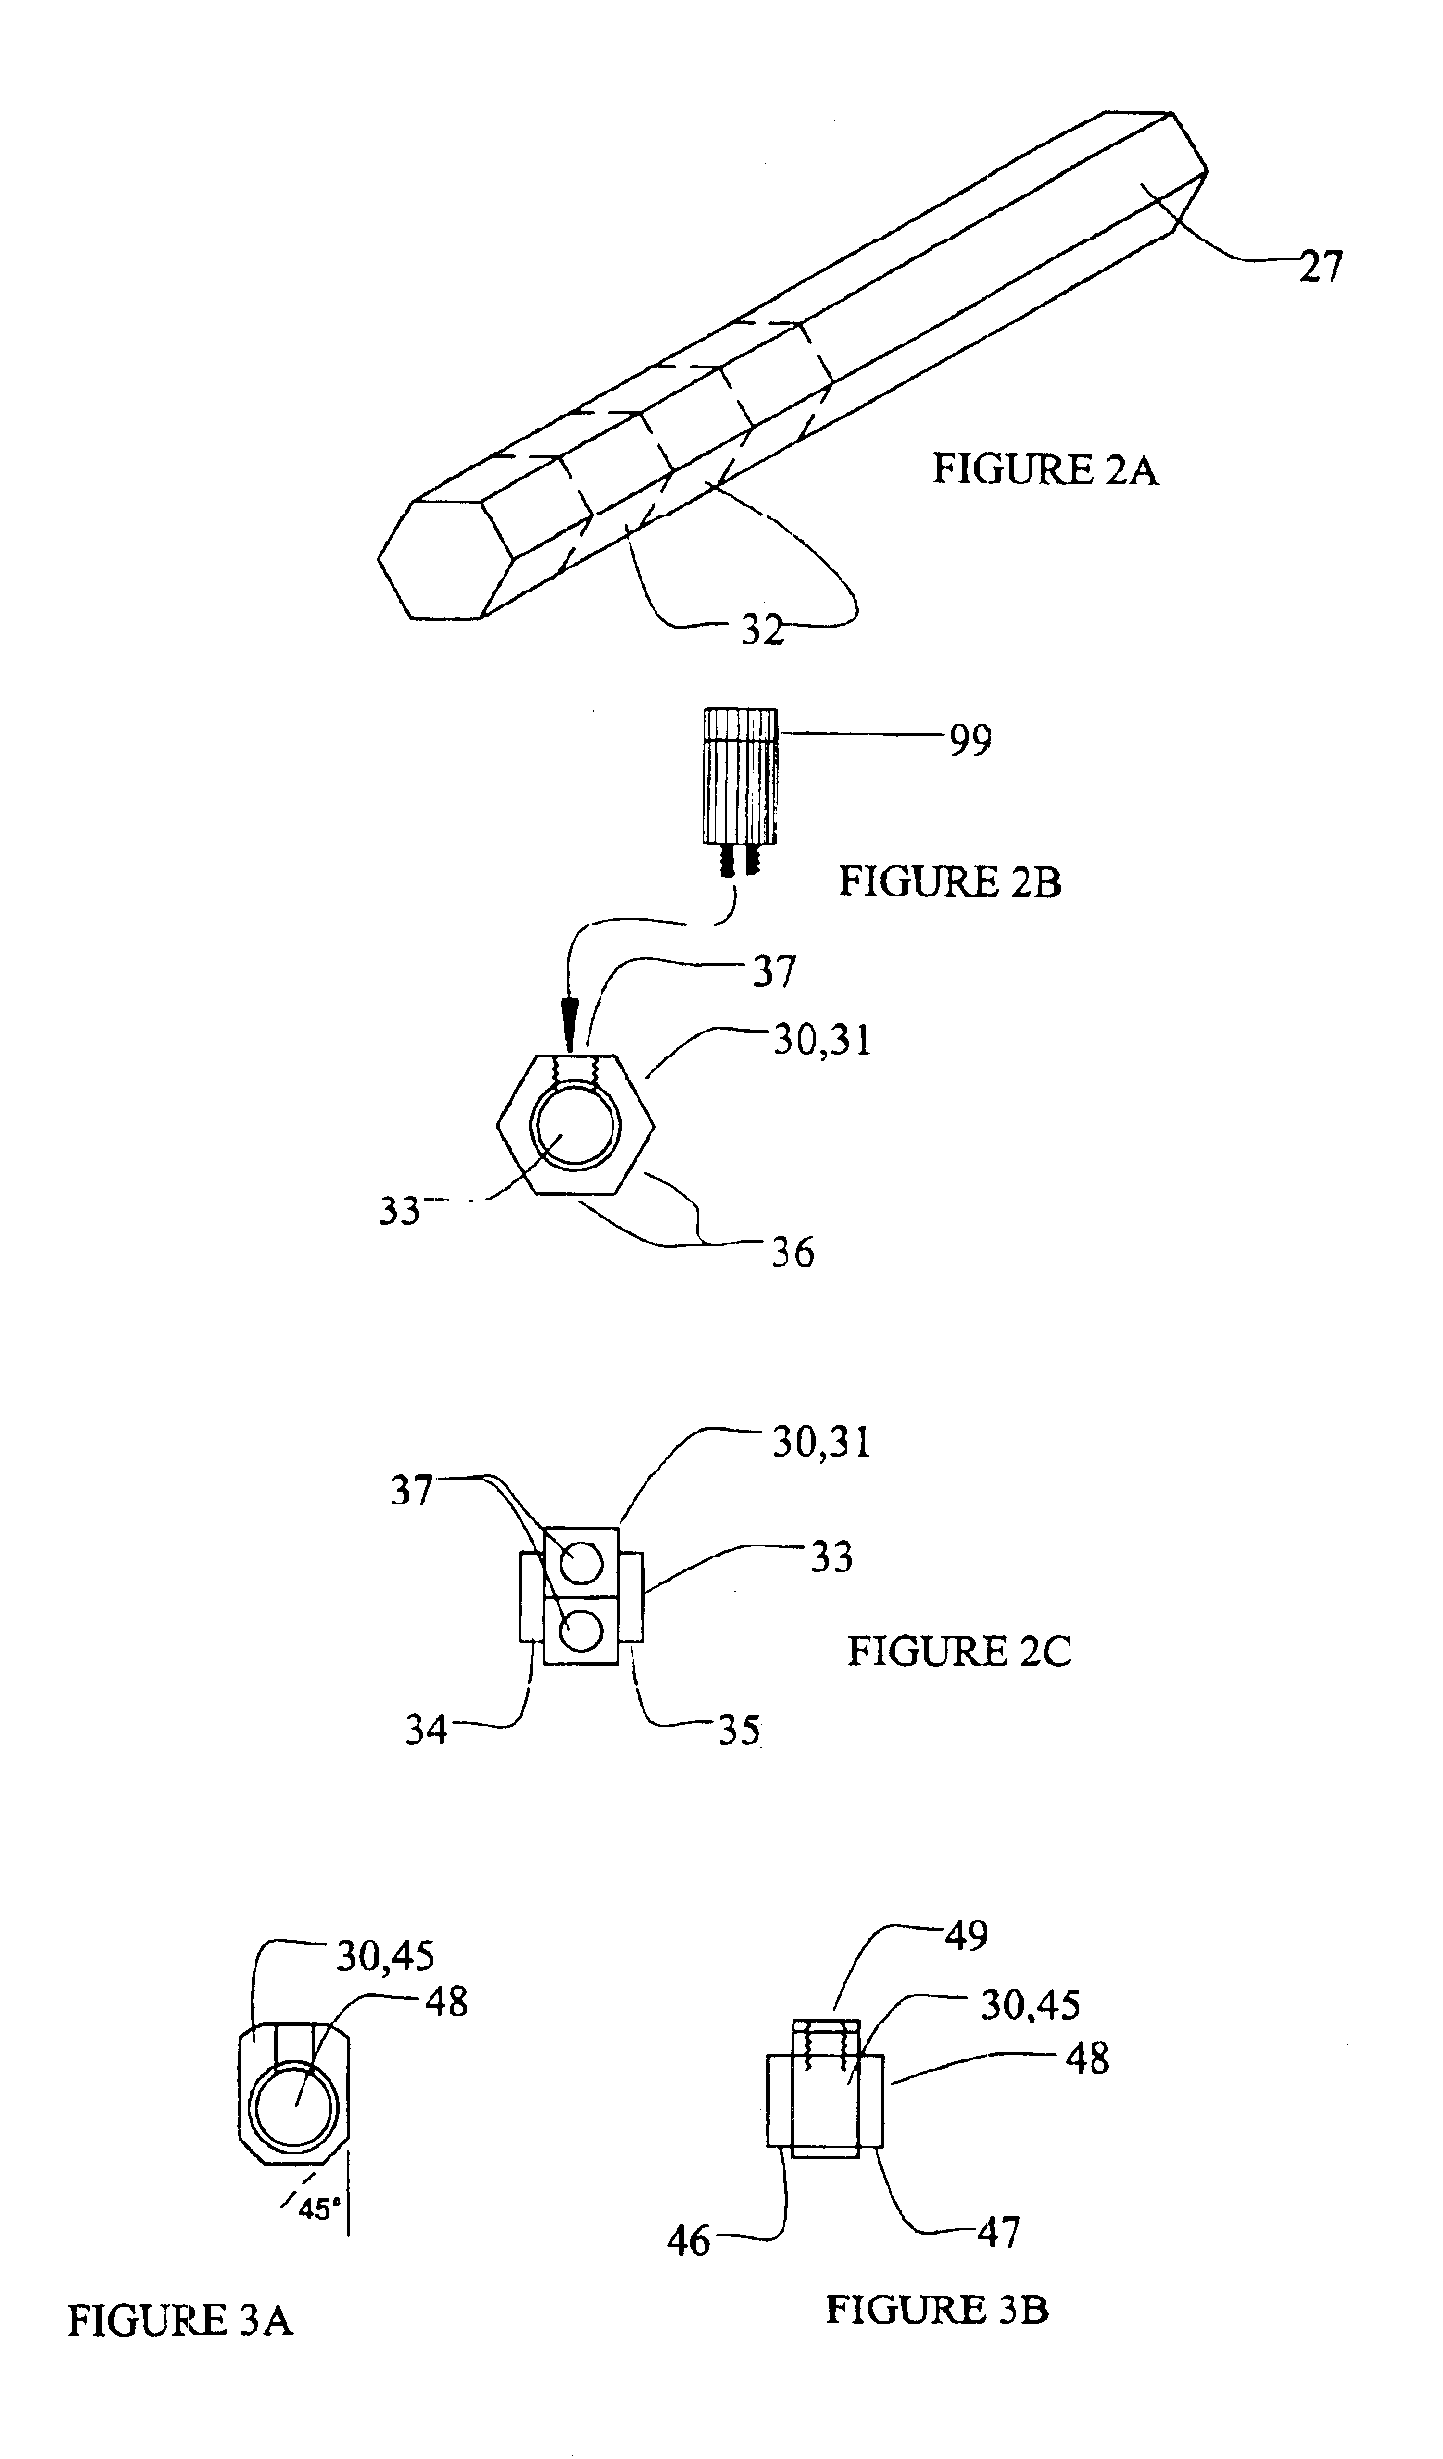 Misting manifold apparatus and method of manufacture